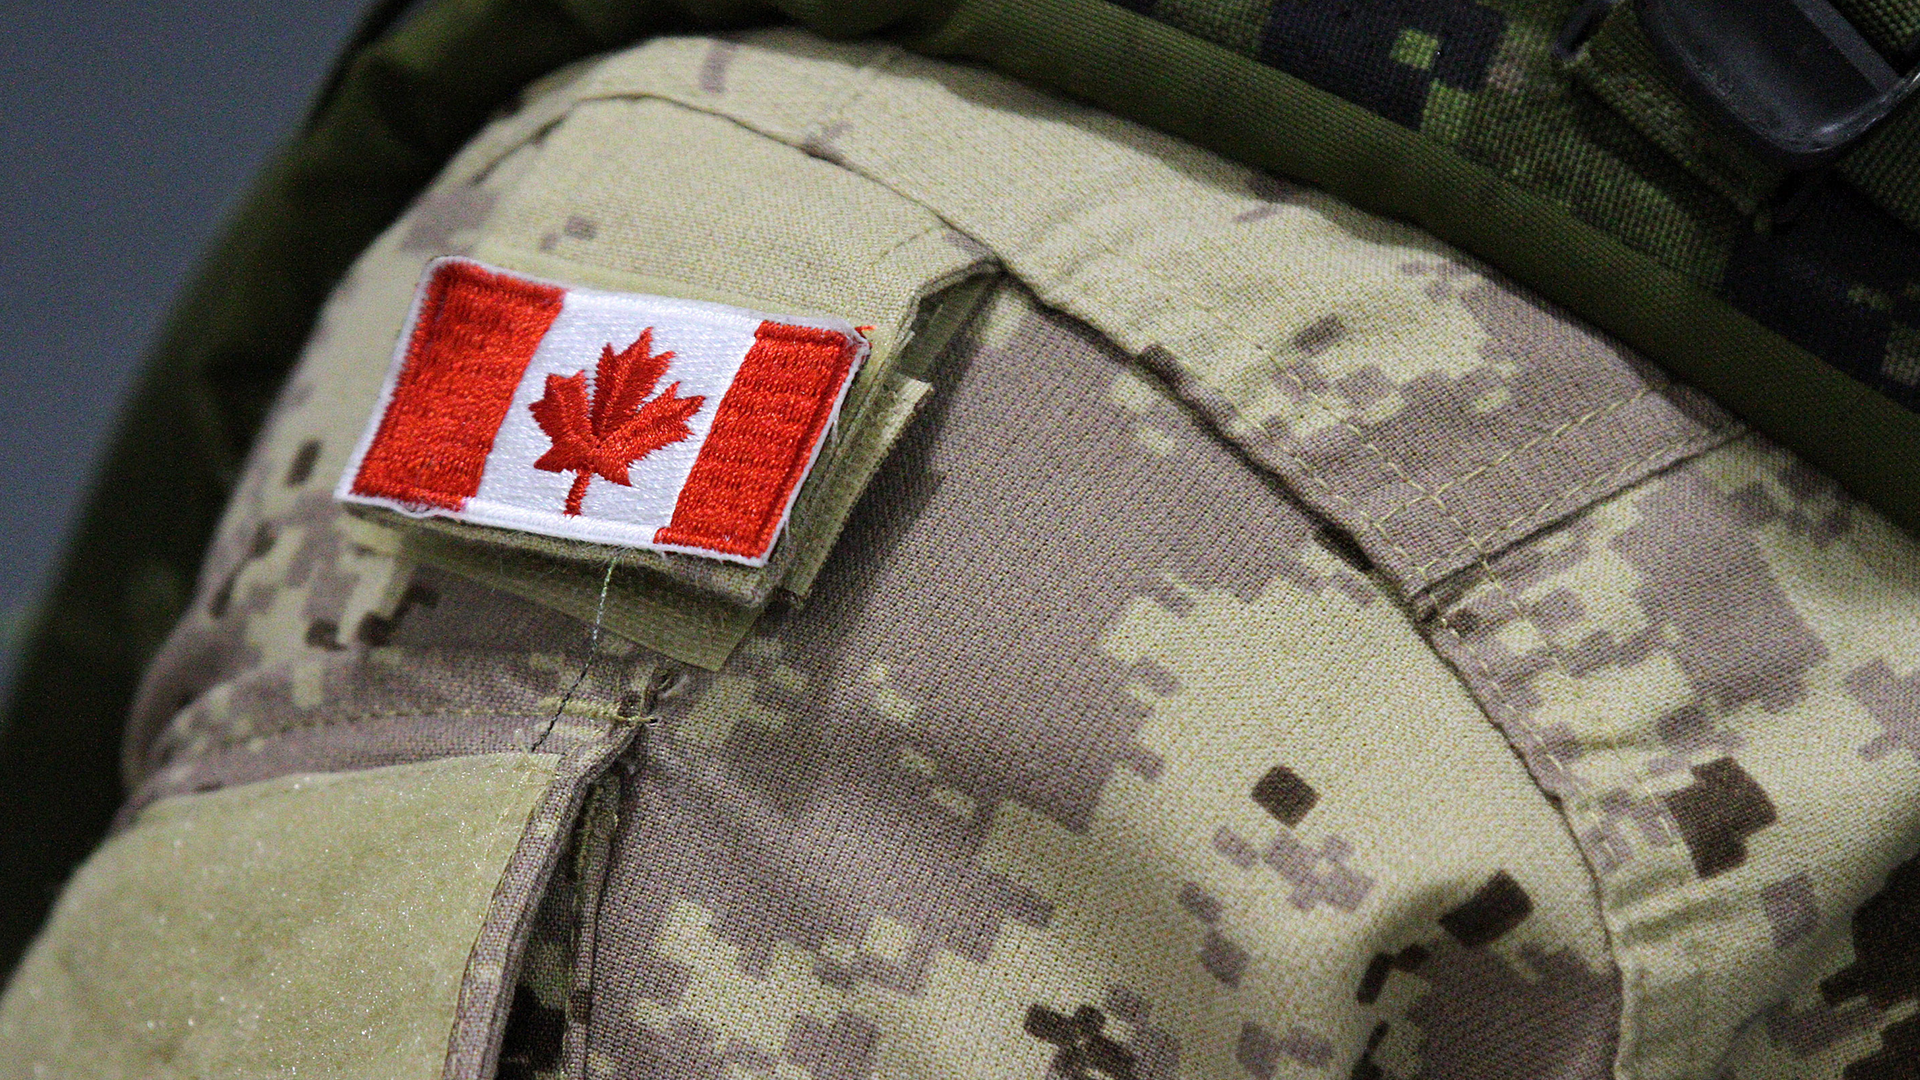 Canadian Armed Forces: Changes are underway but slow to materialize